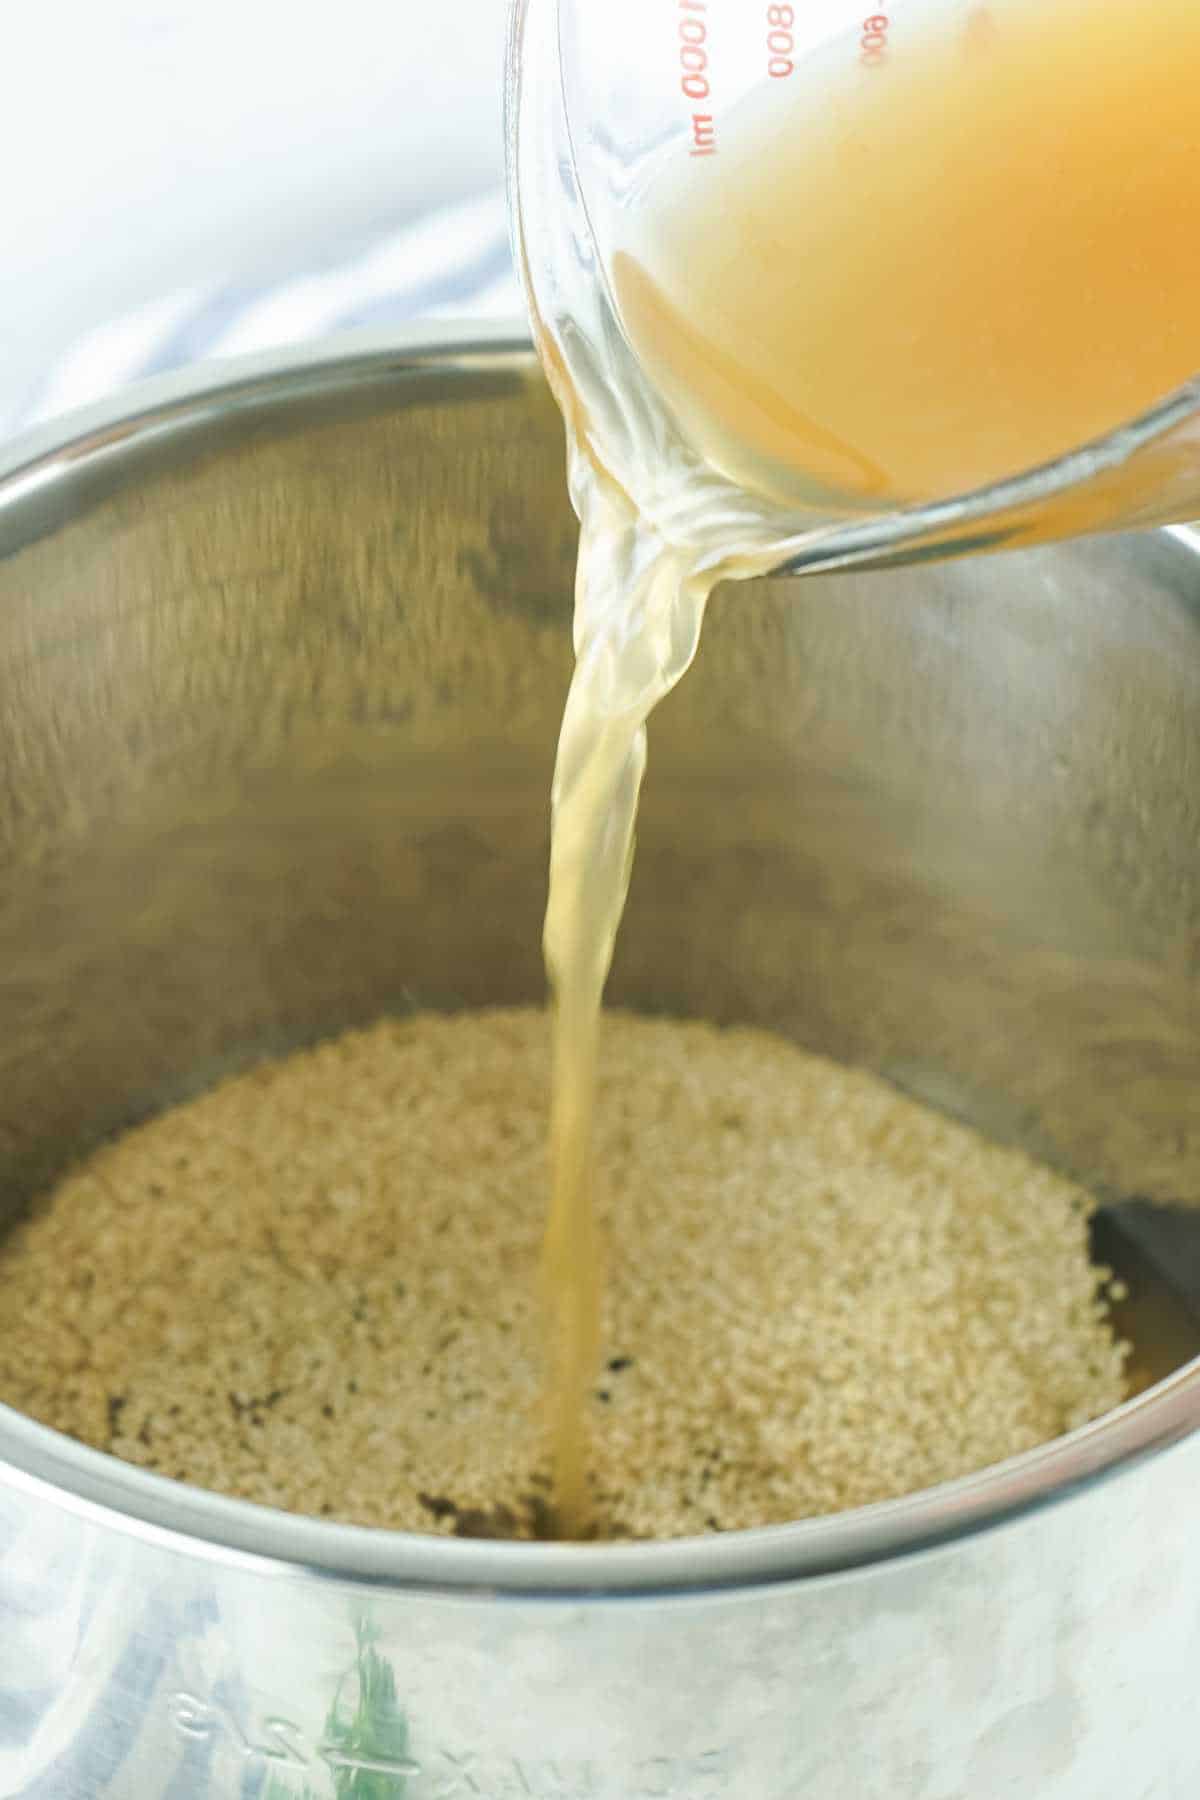 broth poured into a stainless pot with white grain.